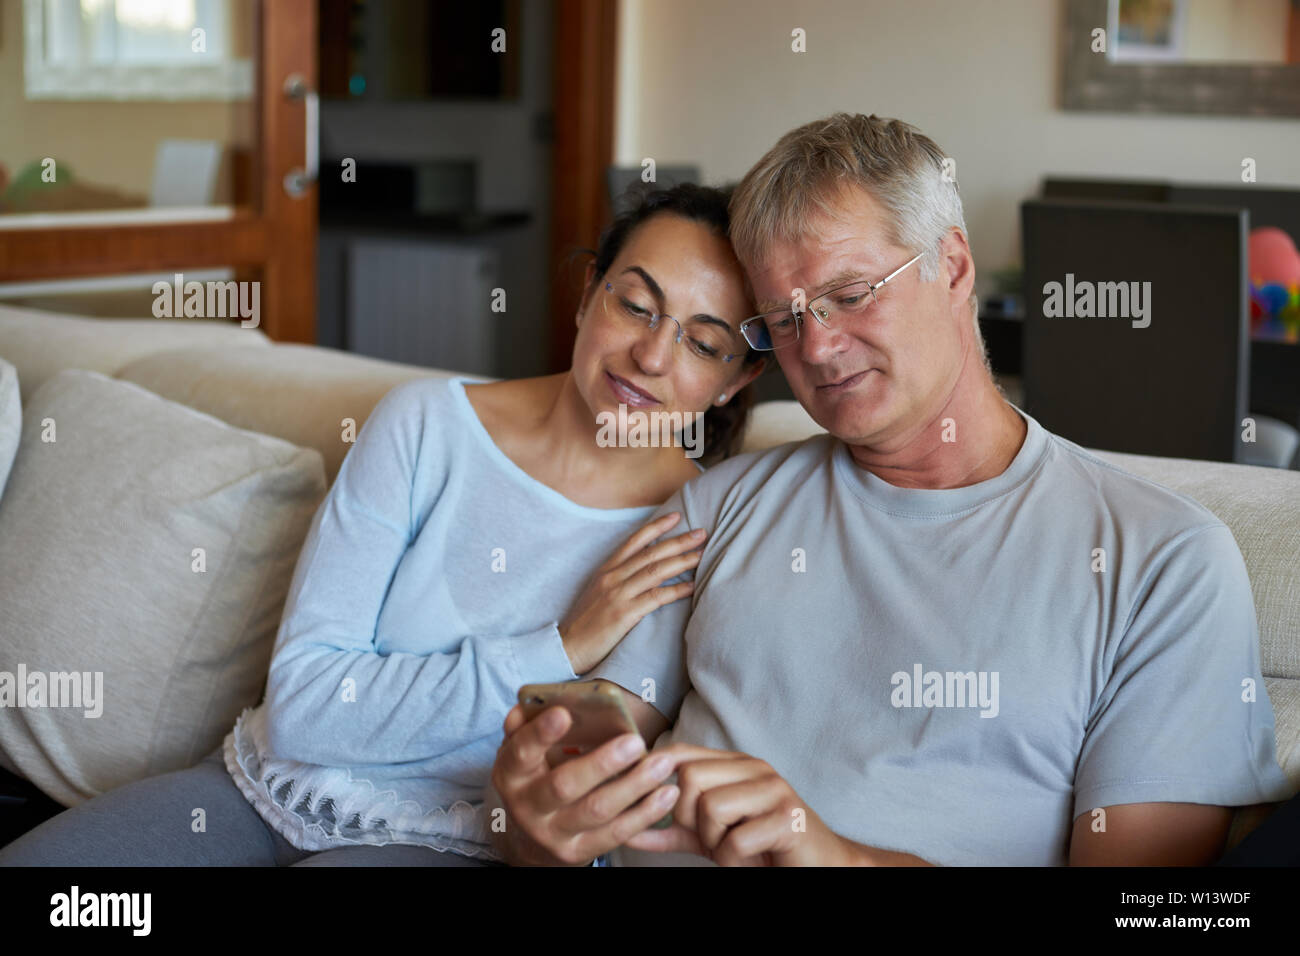 Middle-aged couple looking a mobile phone Stock Photo